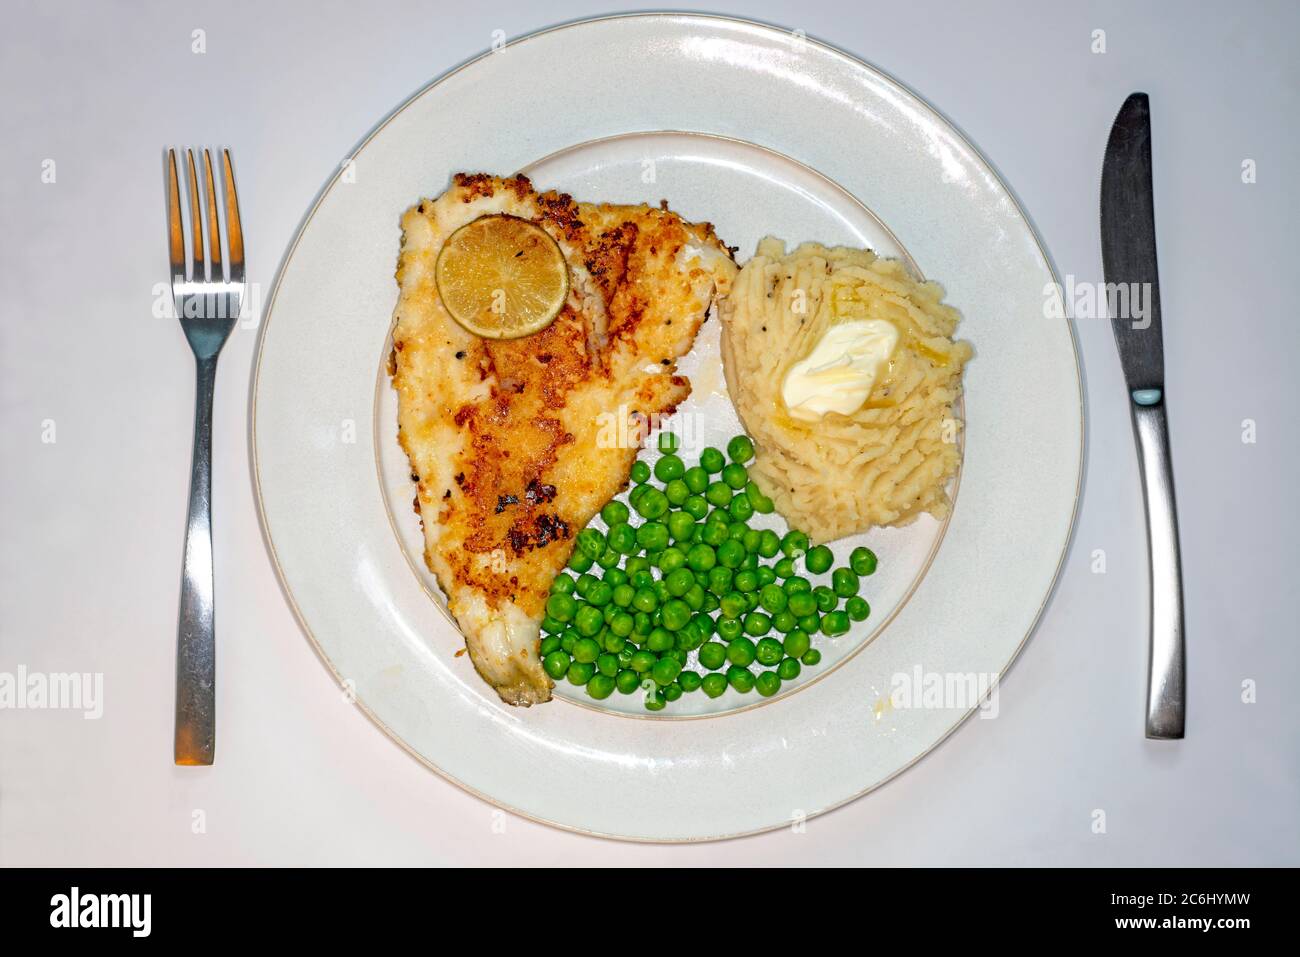 Lightly fried breaded plaice, mashed potatoes and peas Stock Photo